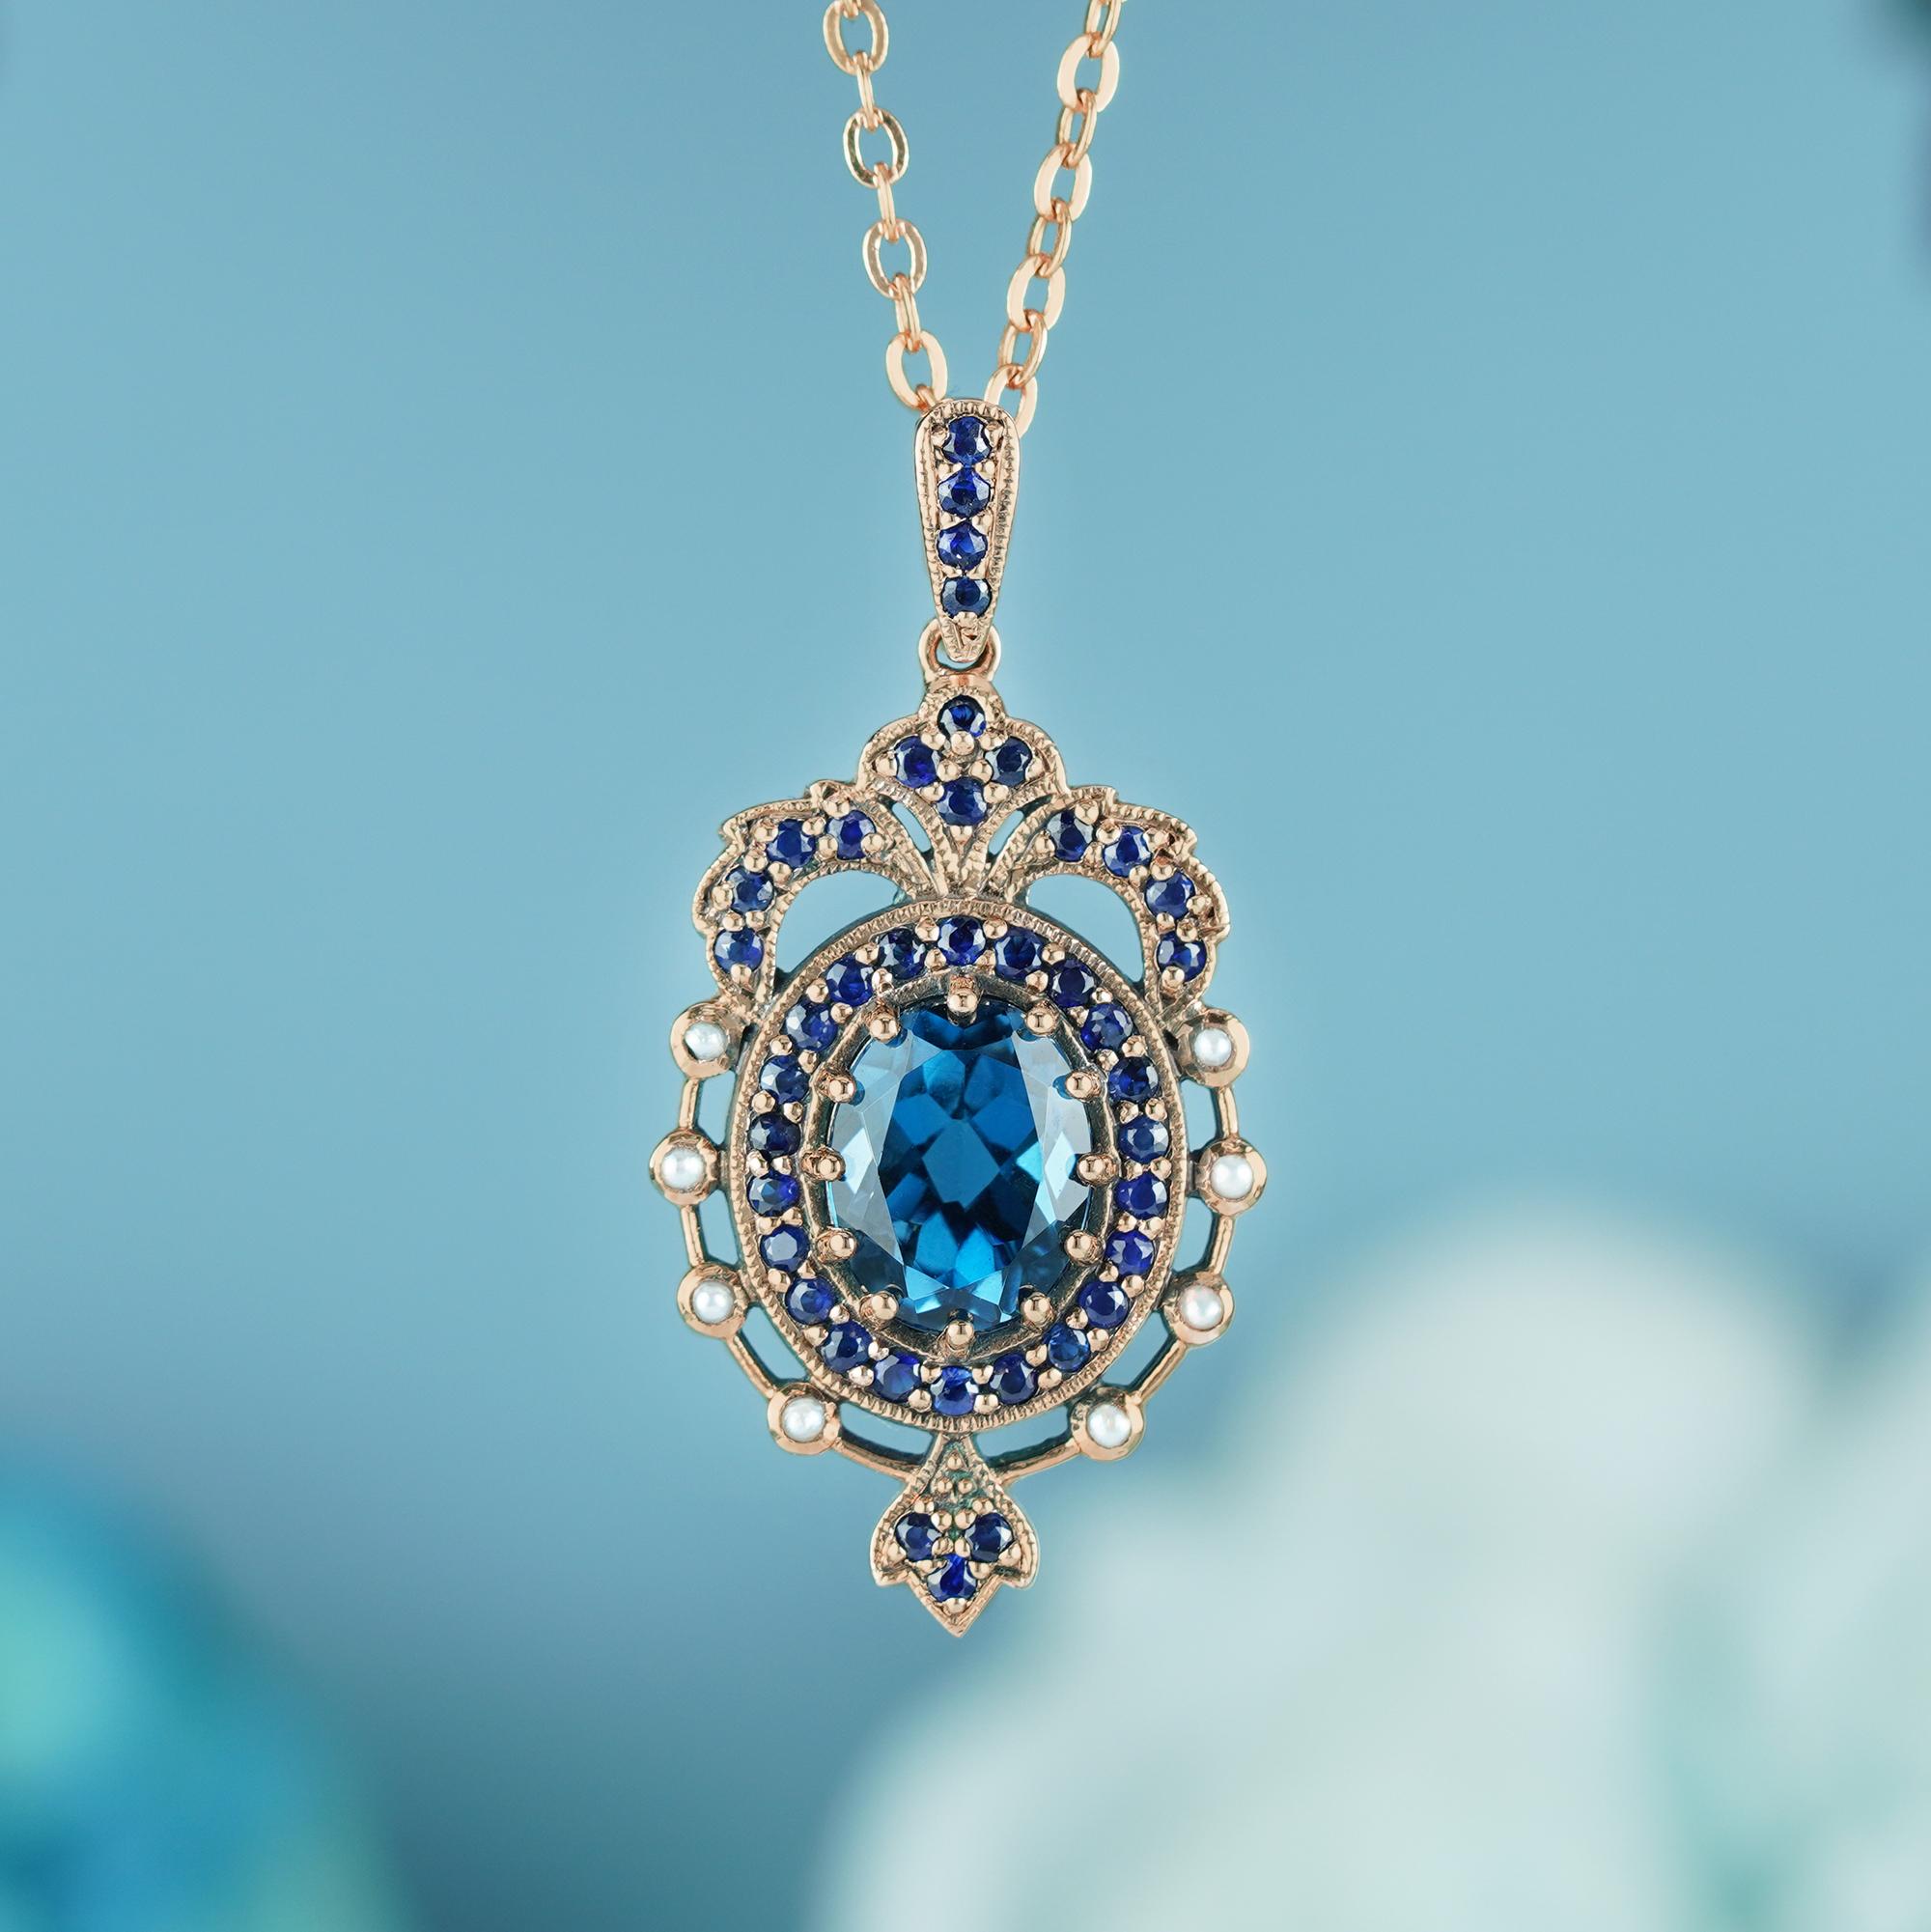 Add a delicate and unique aesthetic to your look with this pendant by GEMMA FILIGREE. Our antique design gold earrings equate to delicacy and light openwork, while maintains strength for everyday wear for a lifetime.


CHARACTERISTICS
Status: Made